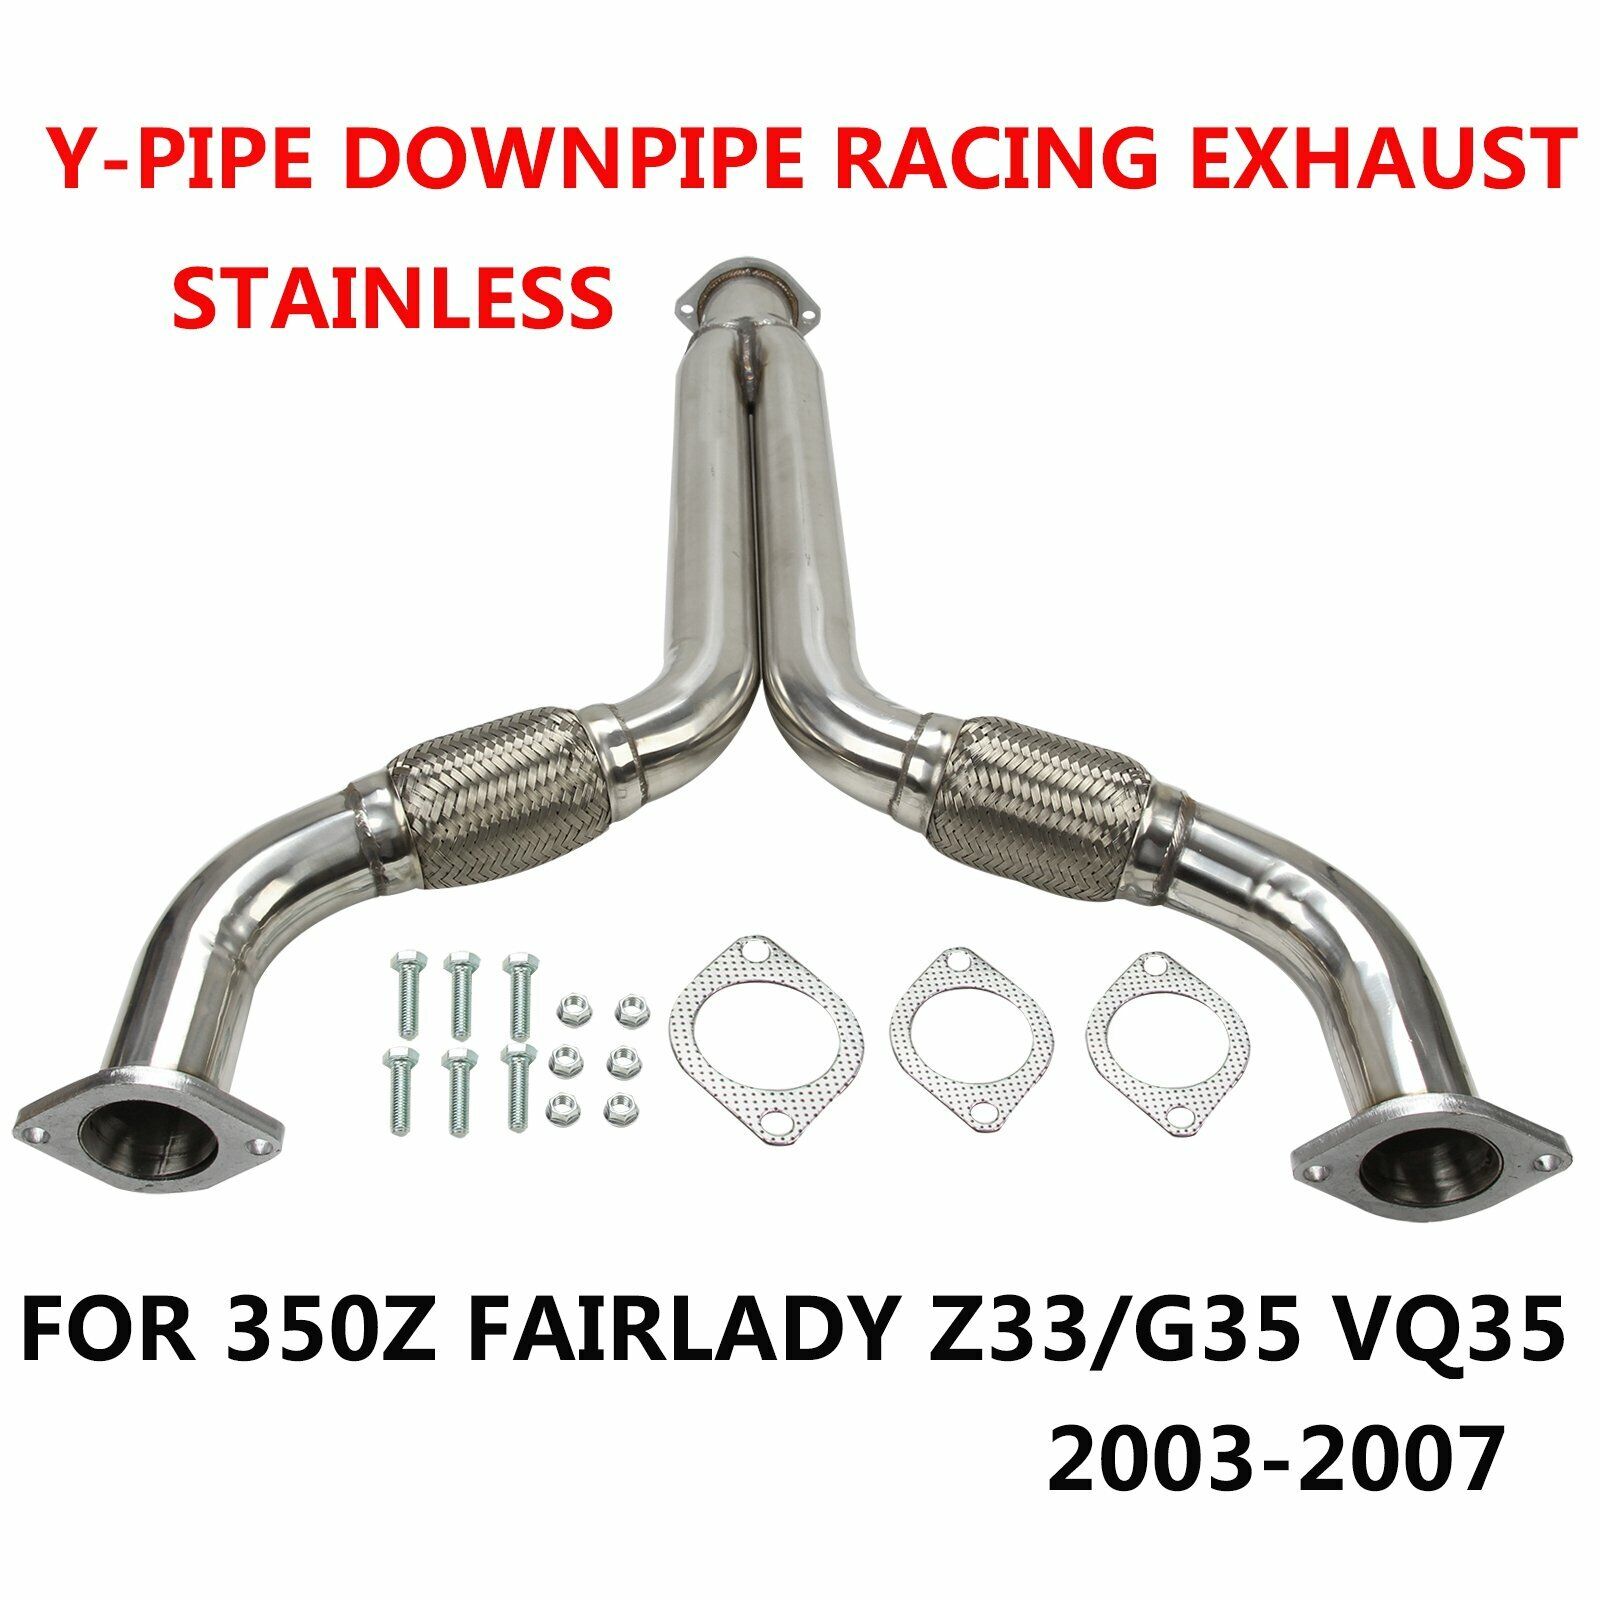 FOR 350Z FAIRLADY Z33/G35 VQ35 Y-PIPE DOWNPIPE STAINLESS RACING EXHAUST